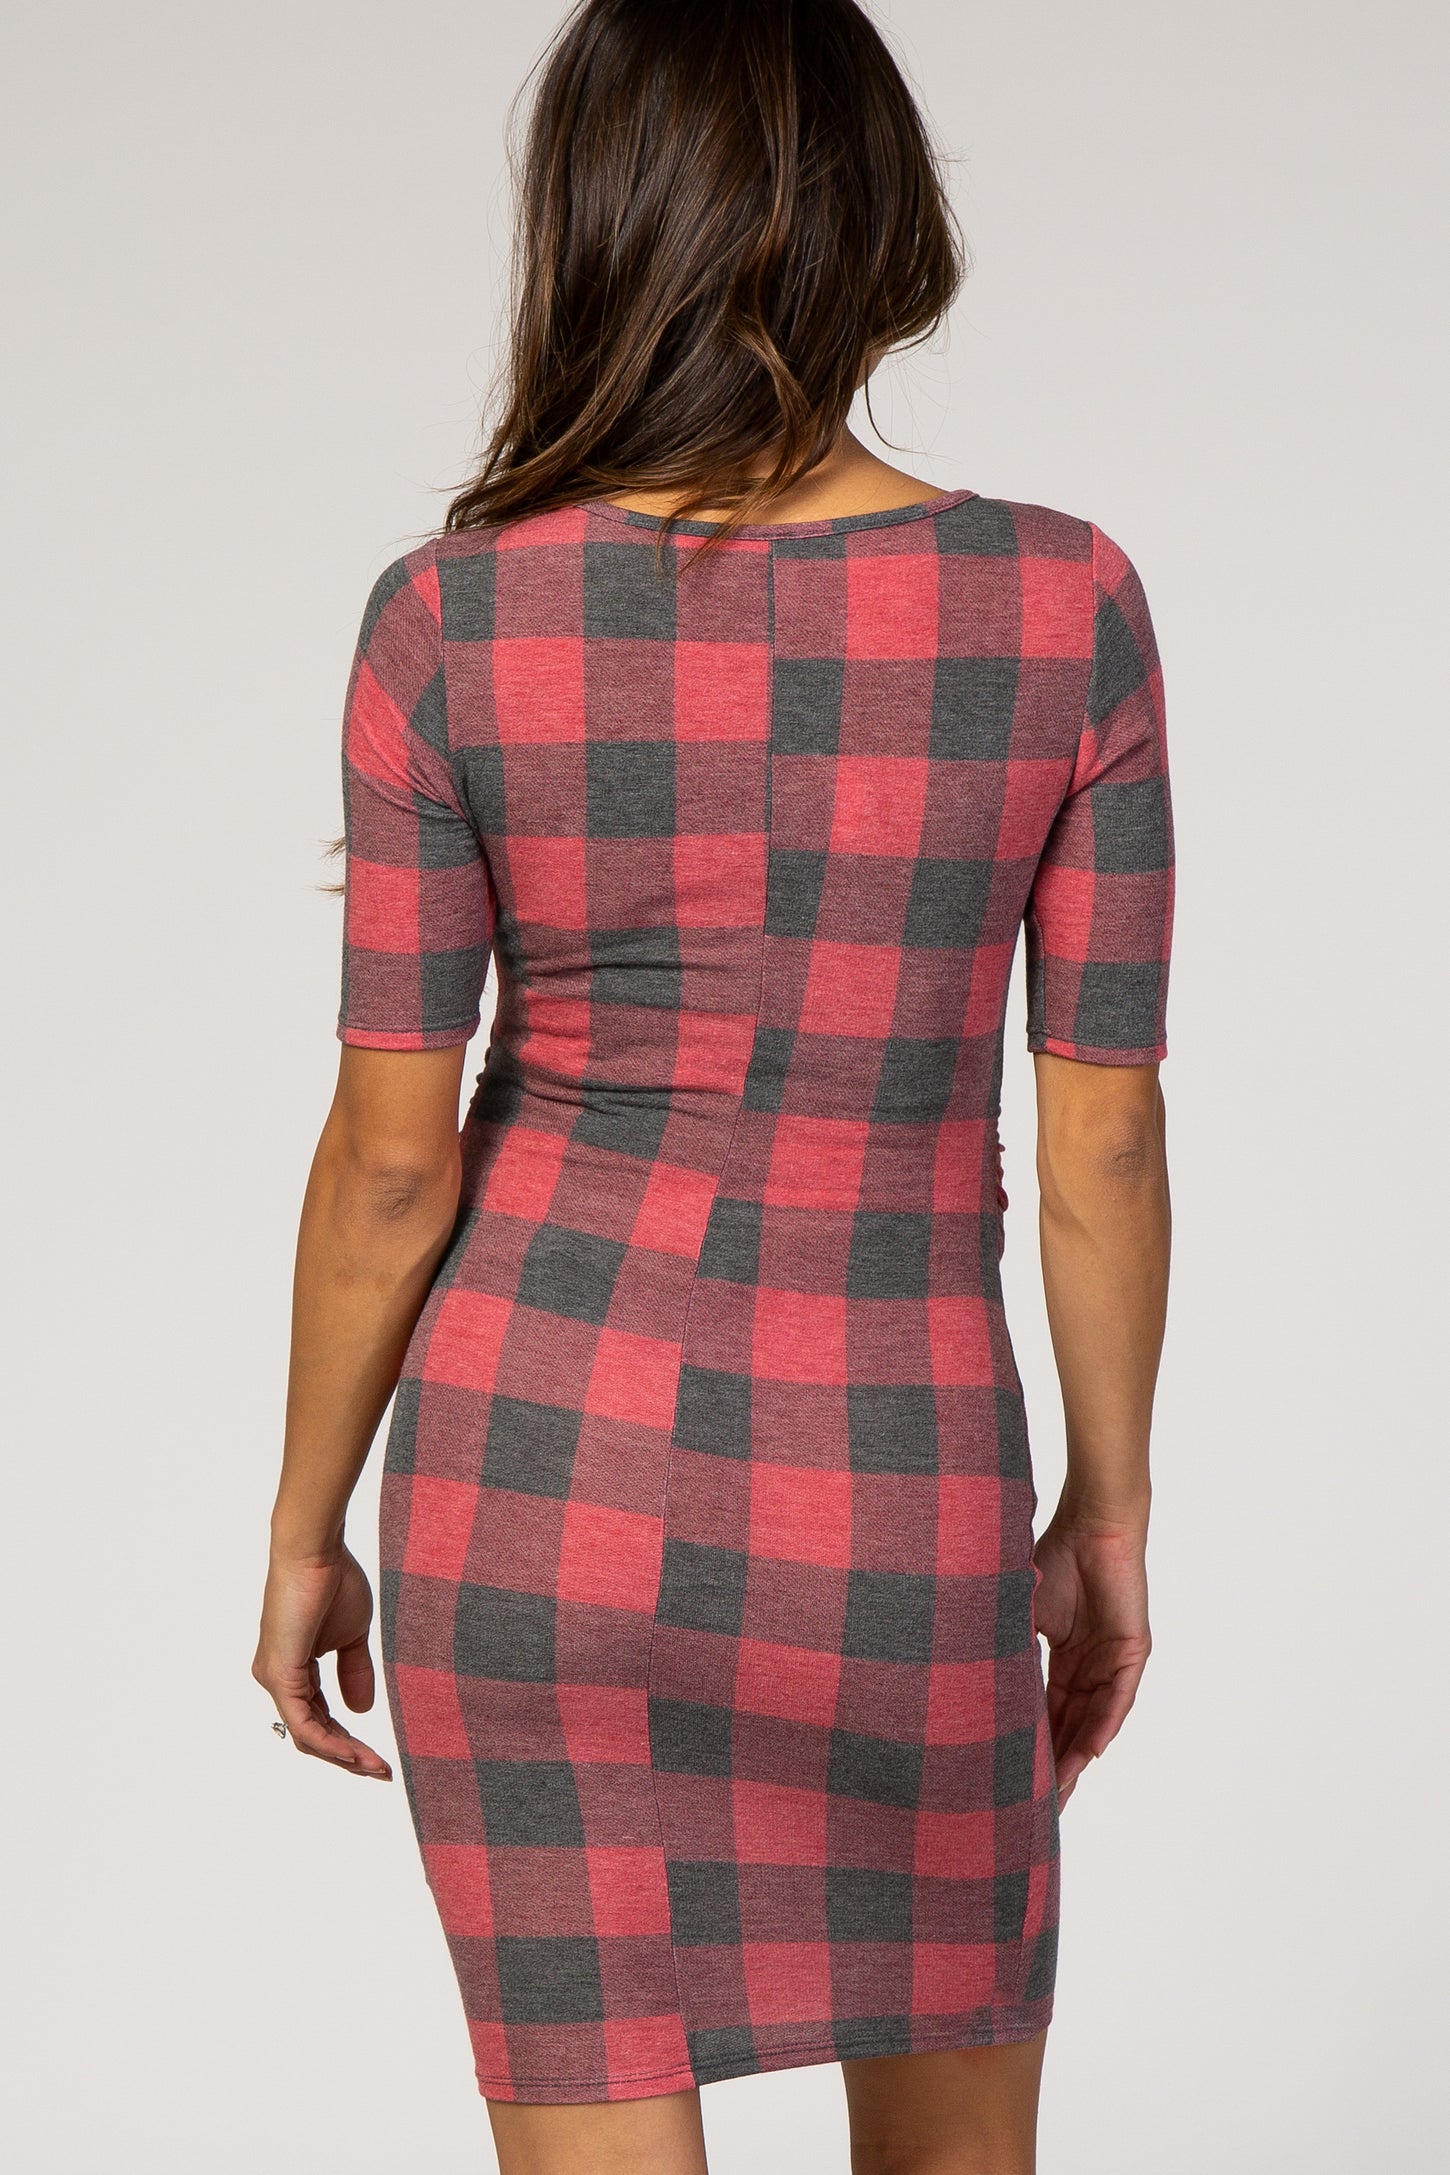 PinkBlush Red Plaid Fitted Maternity Dress